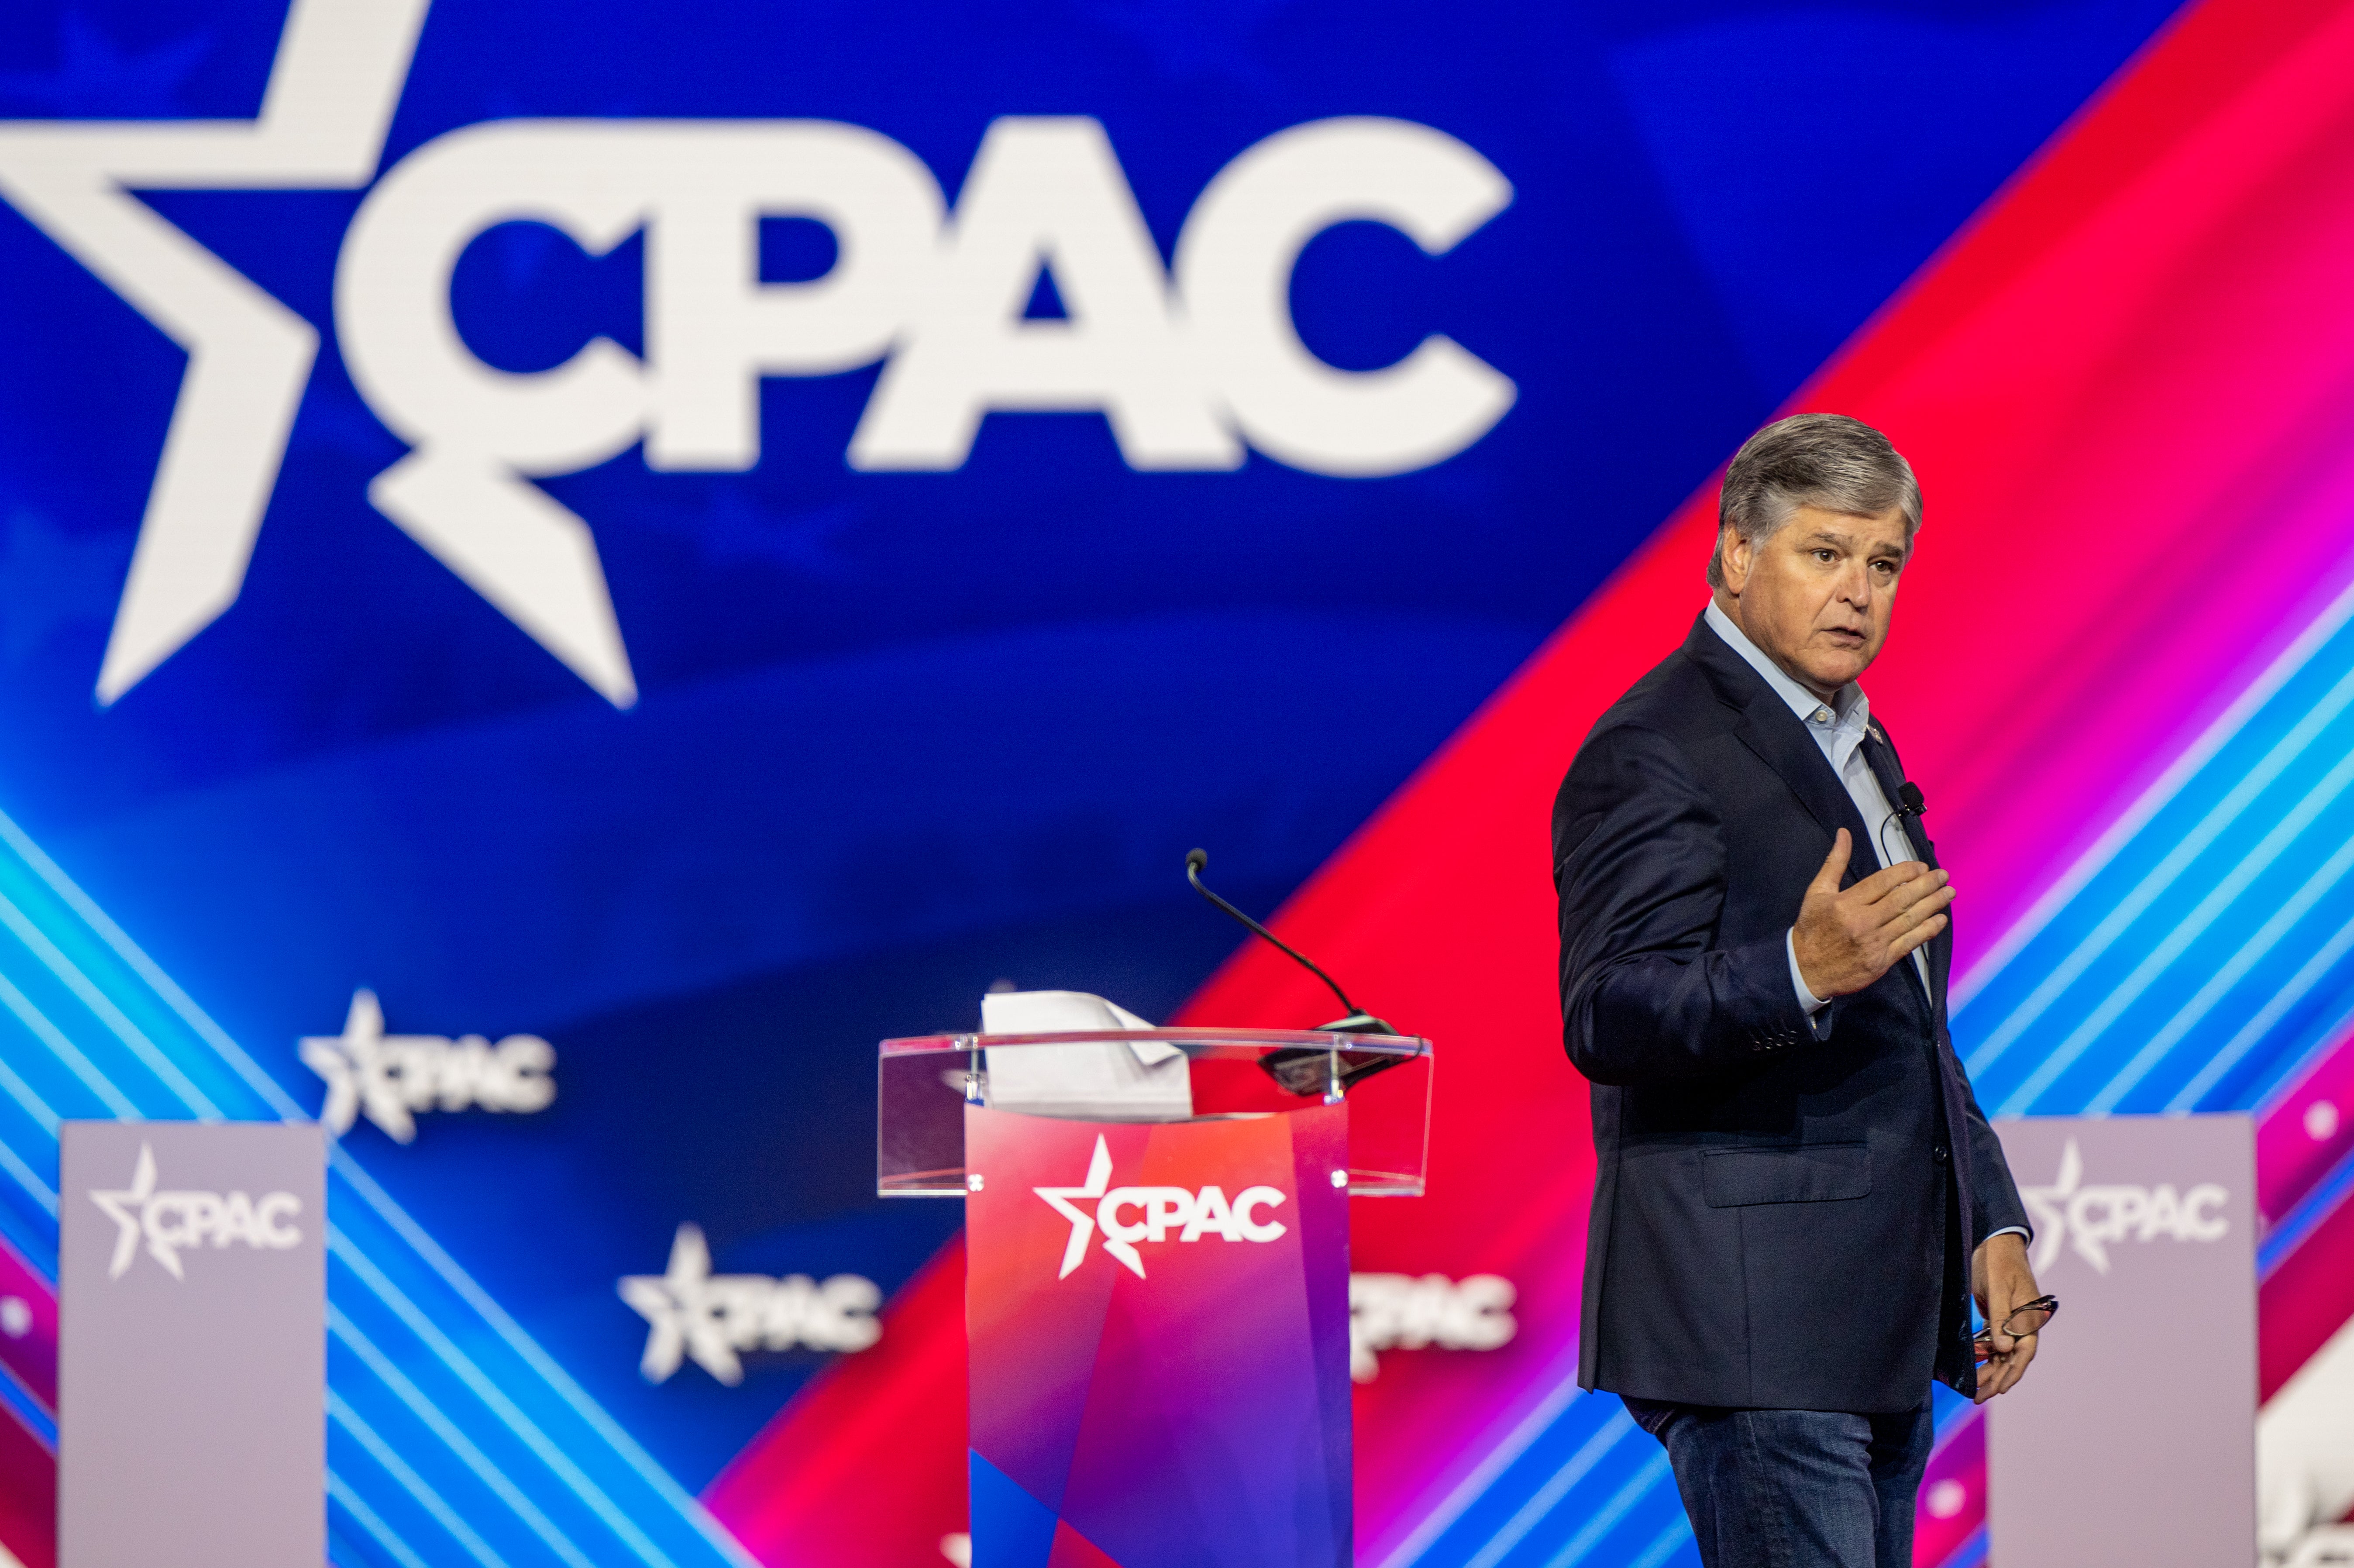 Sean Hannity said he is a “big believer” in the Second Amendment